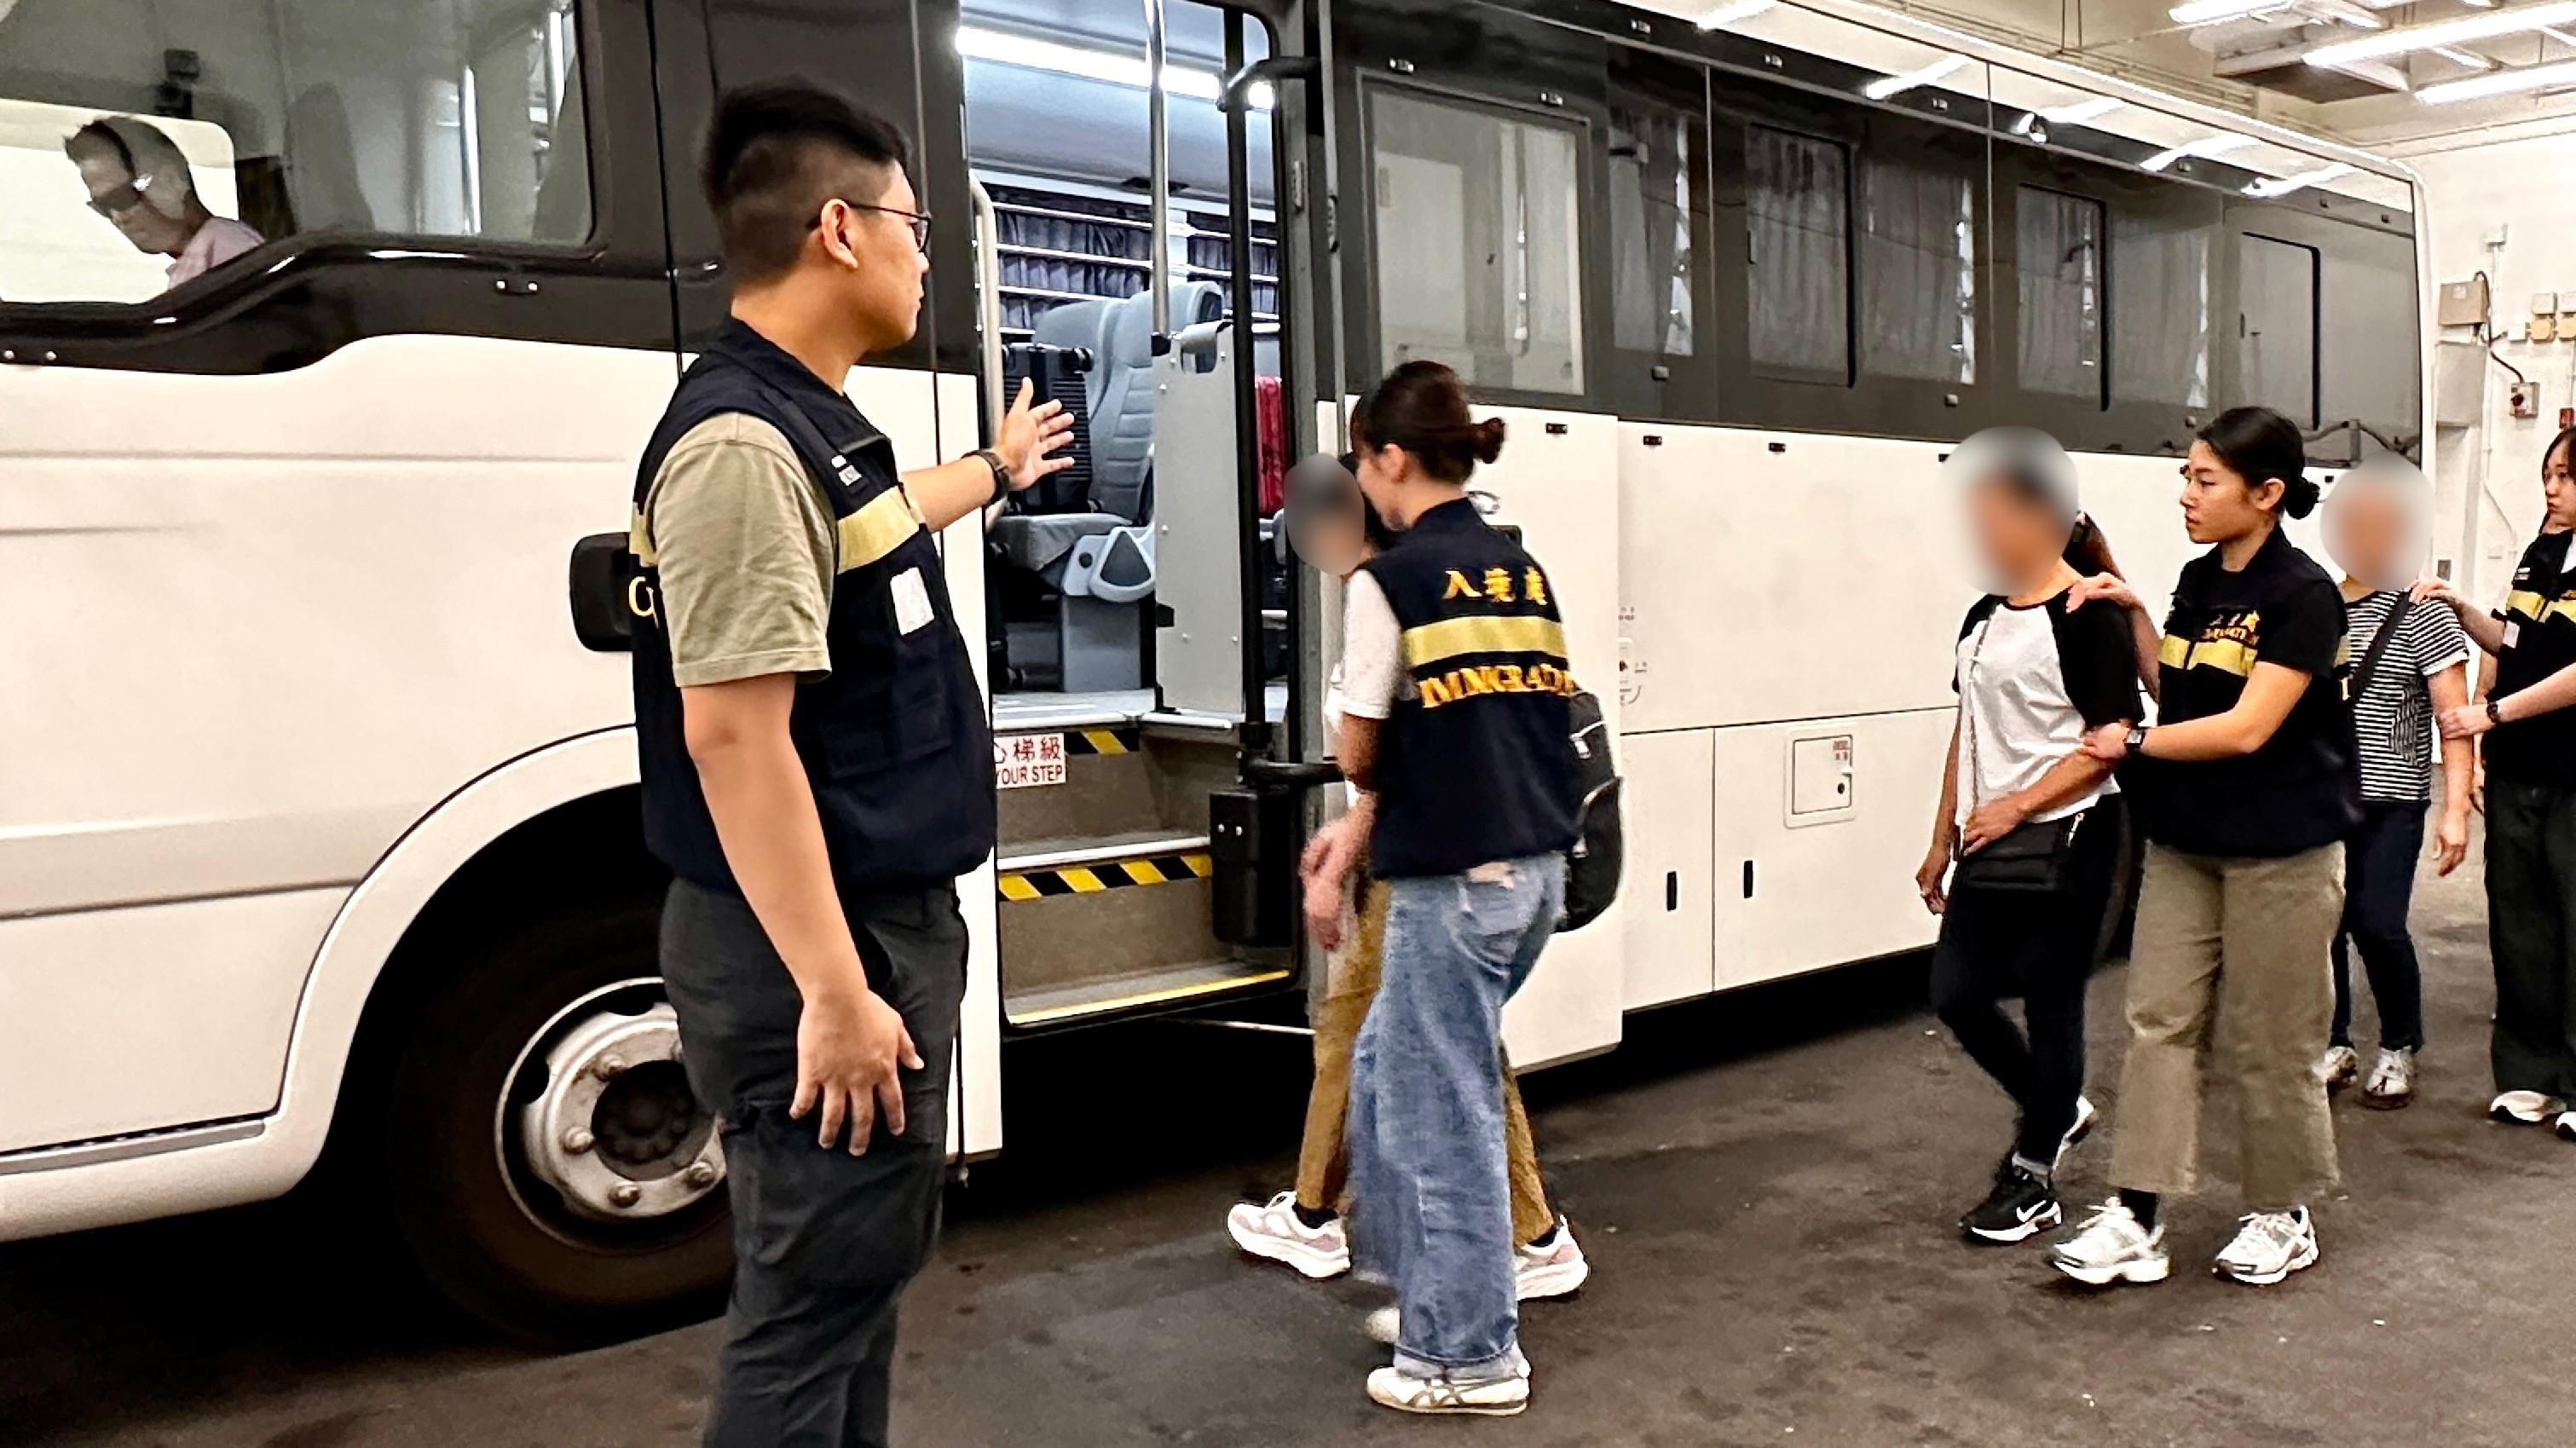 The Immigration Department (ImmD) carried out a repatriation operation today (August 25). A total of 30 Vietnamese illegal immigrants were repatriated to Vietnam. Photo shows removees being escorted by ImmD officers to proceed from the detention place to the airport.